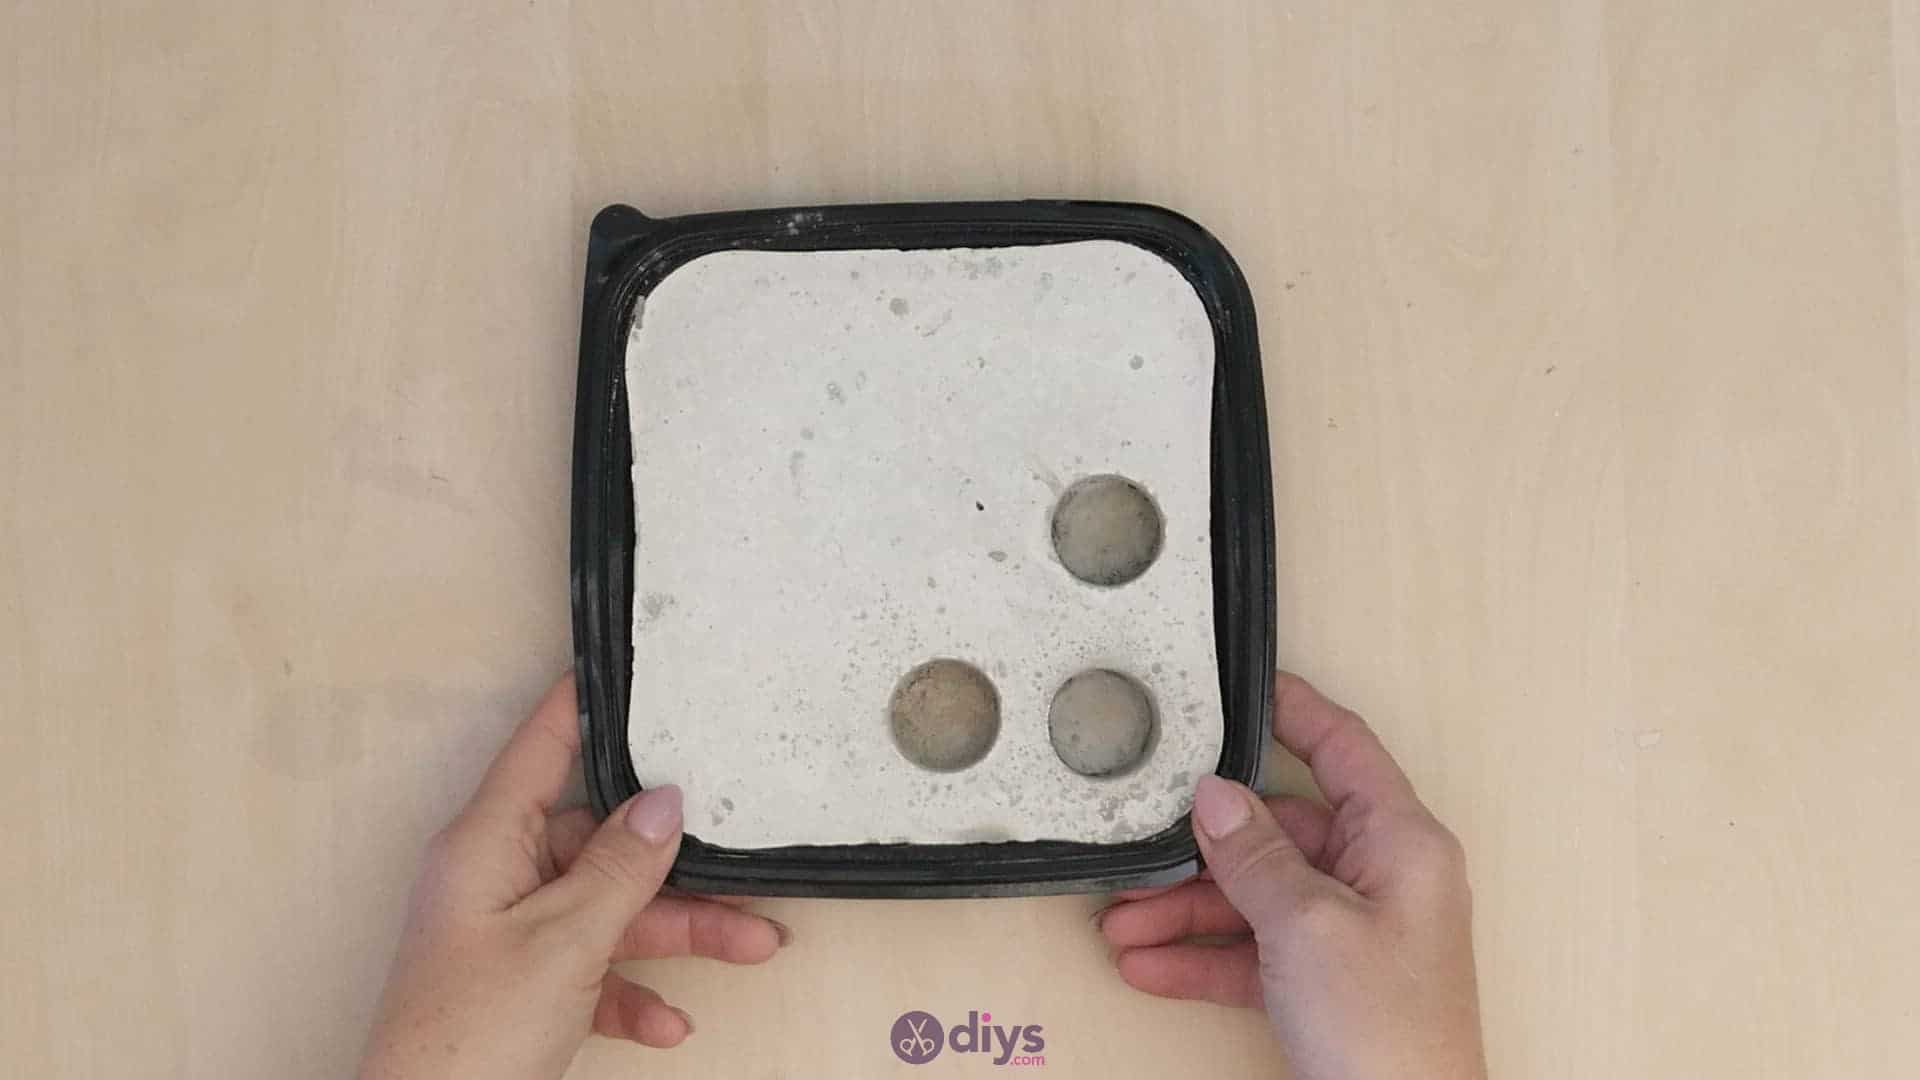 Diy concrete candle holder plate step 6